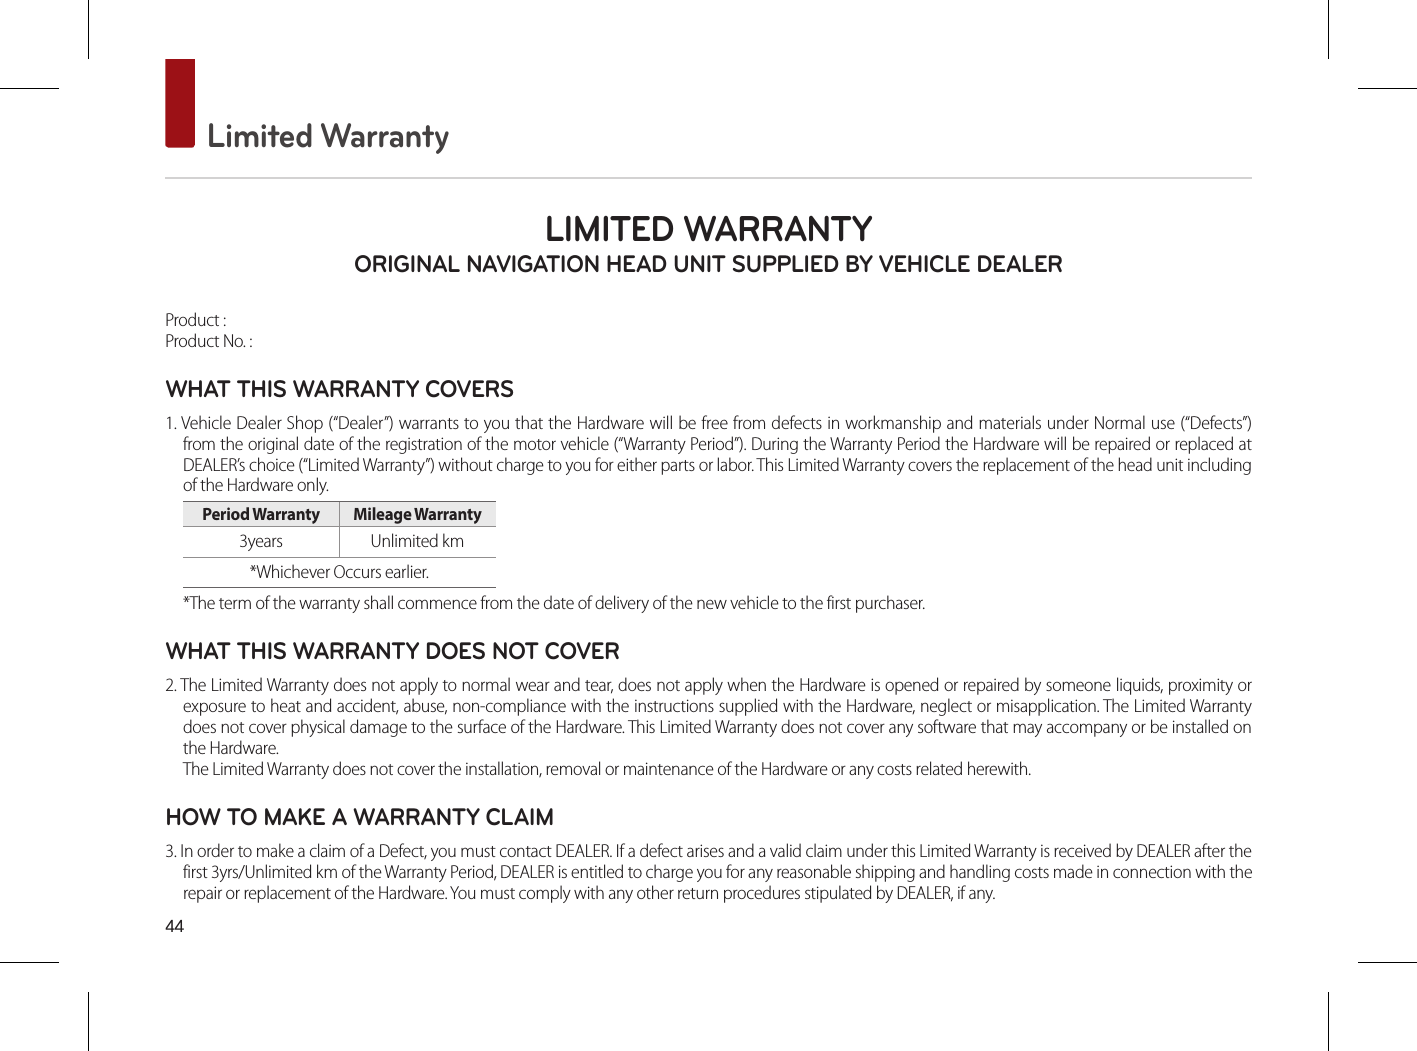 44 Limited WarrantyLIMITED WARRANTY ORIGINAL NAVIGATION HEAD UNIT SUPPLIED BY VEHICLE DEALER Product : Product No. : WHAT THIS WARRANTY COVERS 1. Vehicle Dealer Shop (“Dealer”) warrants to you that the Hardware will be free from defects in workmanship and materials under Normal use (“Defects”) from the original date of the registration of the motor vehicle (“Warranty Period”). During the Warranty Period the Hardware will be repaired or replaced at DEALER’s choice (“Limited Warranty”) without charge to you for either parts or labor. This Limited Warranty covers the replacement of the head unit including of the Hardware only. Period Warranty  Mileage Warranty 3years  Unlimited km*Whichever Occurs earlier.*The term of the warranty shall commence from the date of delivery of the new vehicle to the first purchaser.WHAT THIS WARRANTY DOES NOT COVER 2. The Limited Warranty does not apply to normal wear and tear, does not apply when the Hardware is opened or repaired by someone liquids, proximity or exposure to heat and accident, abuse, non-compliance with the instructions supplied with the Hardware, neglect or misapplication. The Limited Warranty does not cover physical damage to the surface of the Hardware. This Limited Warranty does not cover any software that may accompany or be installed on the Hardware. The Limited Warranty does not cover the installation, removal or maintenance of the Hardware or any costs related herewith.HOW TO MAKE A WARRANTY CLAIM3. In order to make a claim of a Defect, you must contact DEALER. If a defect arises and a valid claim under this Limited Warranty is received by DEALER after the first 3yrs/Unlimited km of the Warranty Period, DEALER is entitled to charge you for any reasonable shipping and handling costs made in connection with the repair or replacement of the Hardware. You must comply with any other return procedures stipulated by DEALER, if any.